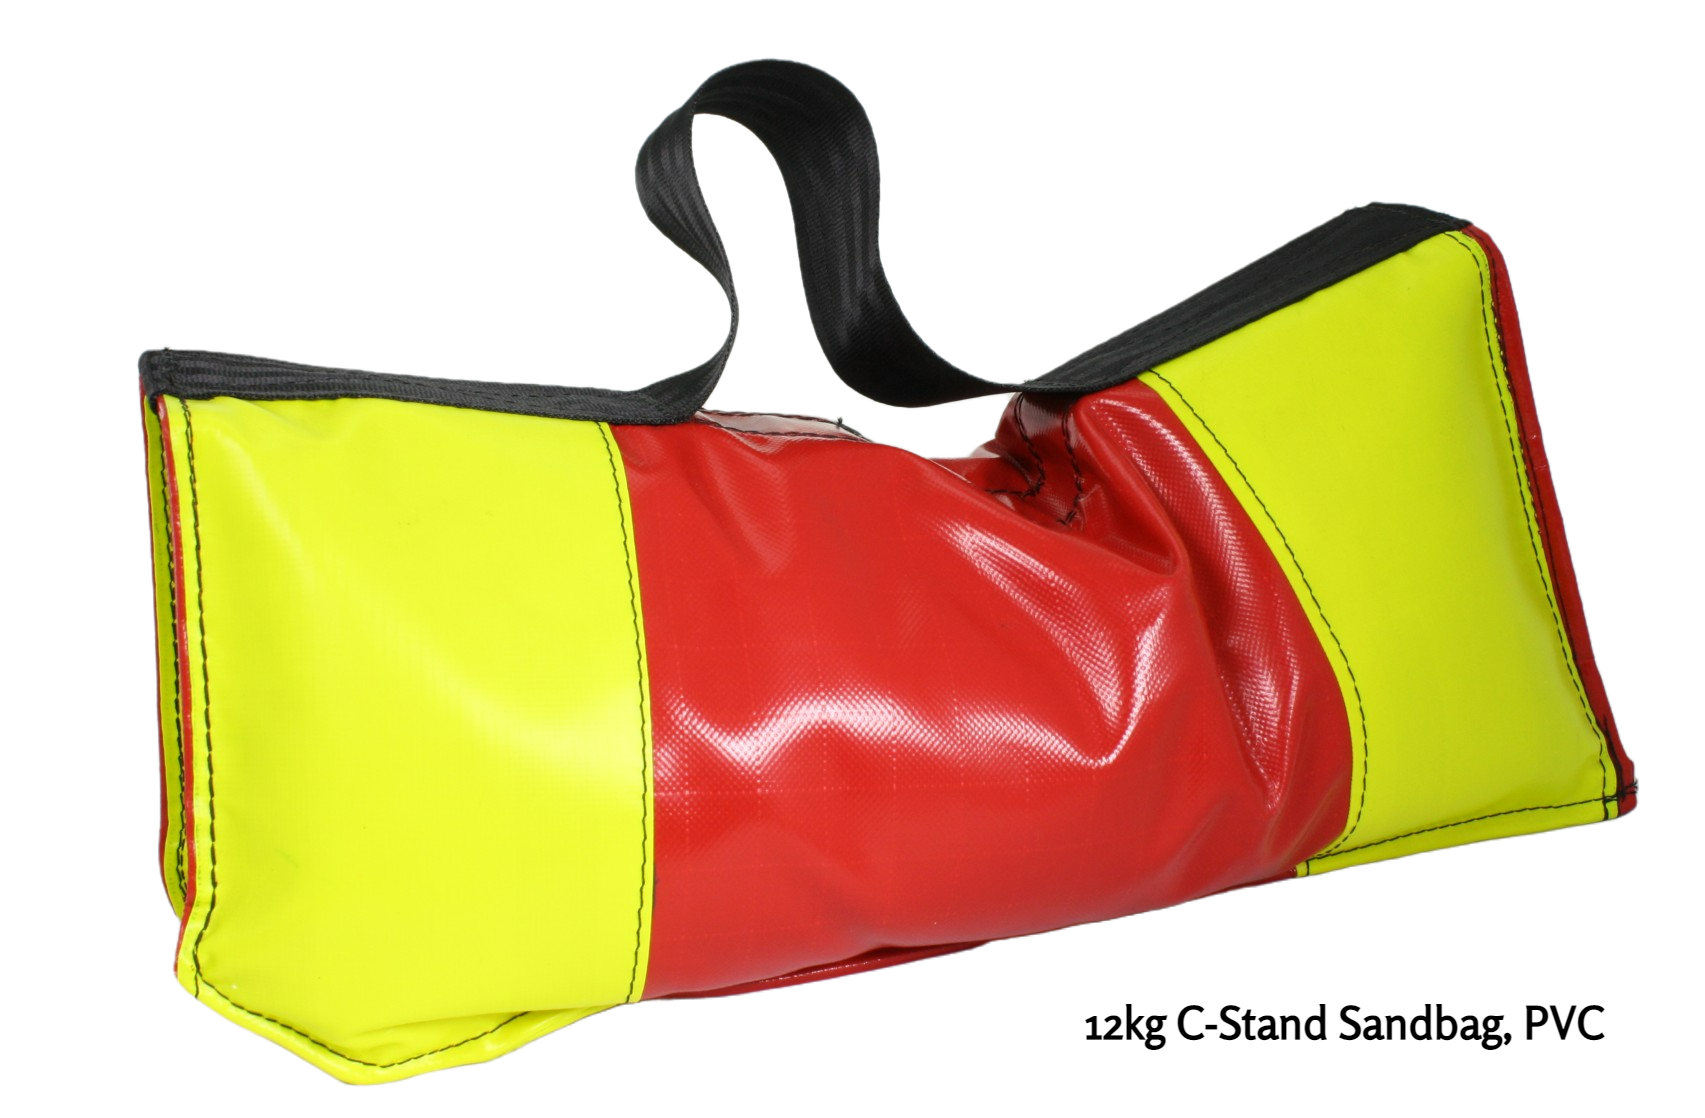 12kg C-stand sandbag, made in red and fluroescent yellow